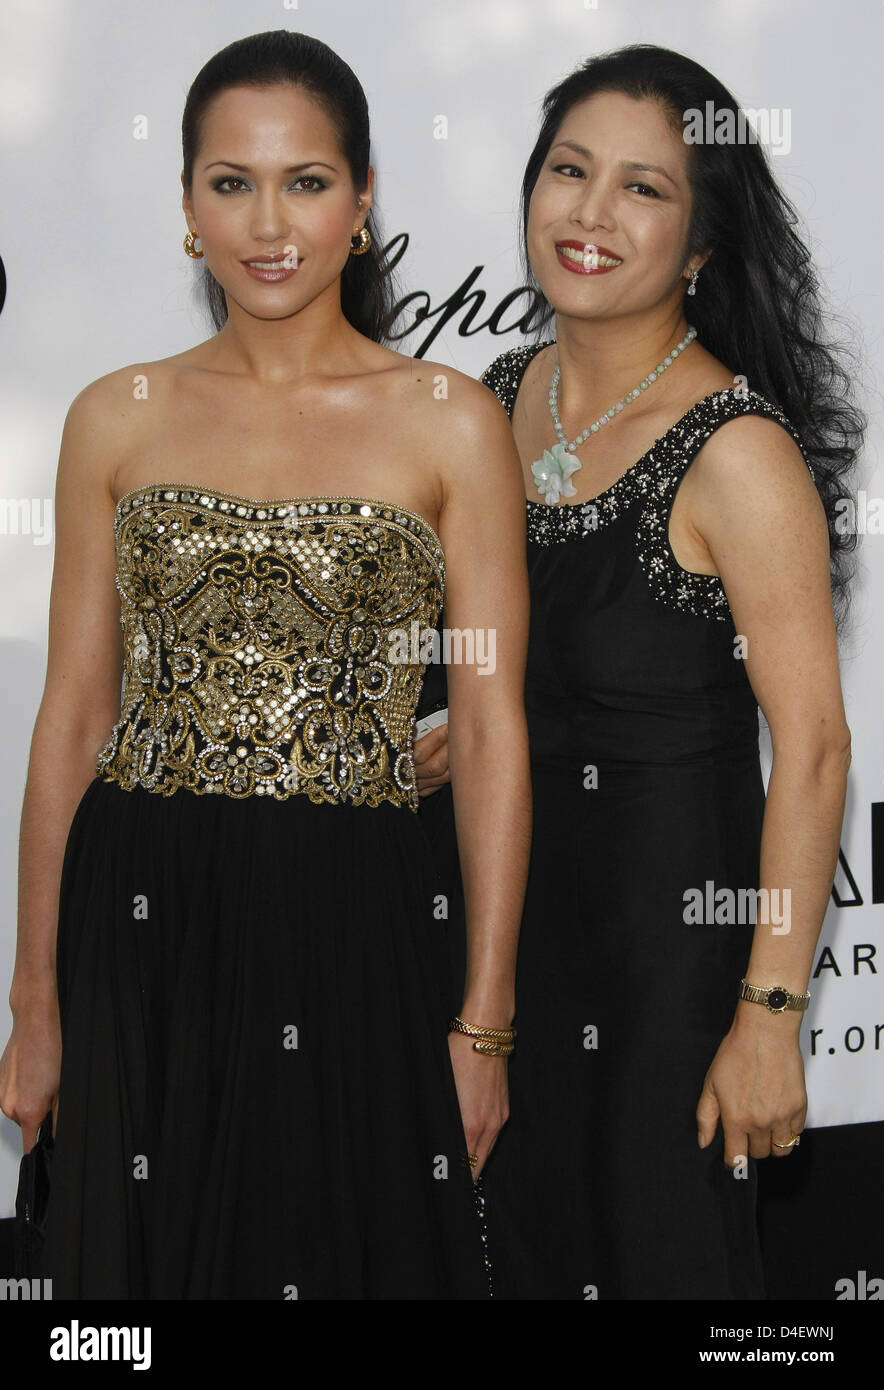 Producer Ankie Lau (r) and her daughter and actress Ankie Beilke arrive at the amfAR Cinema Against Aids Gala at the 61st Cannes Film Festival in Cannes, France, 22 May 2008. Photo: Hubert Boesl Stock Photo